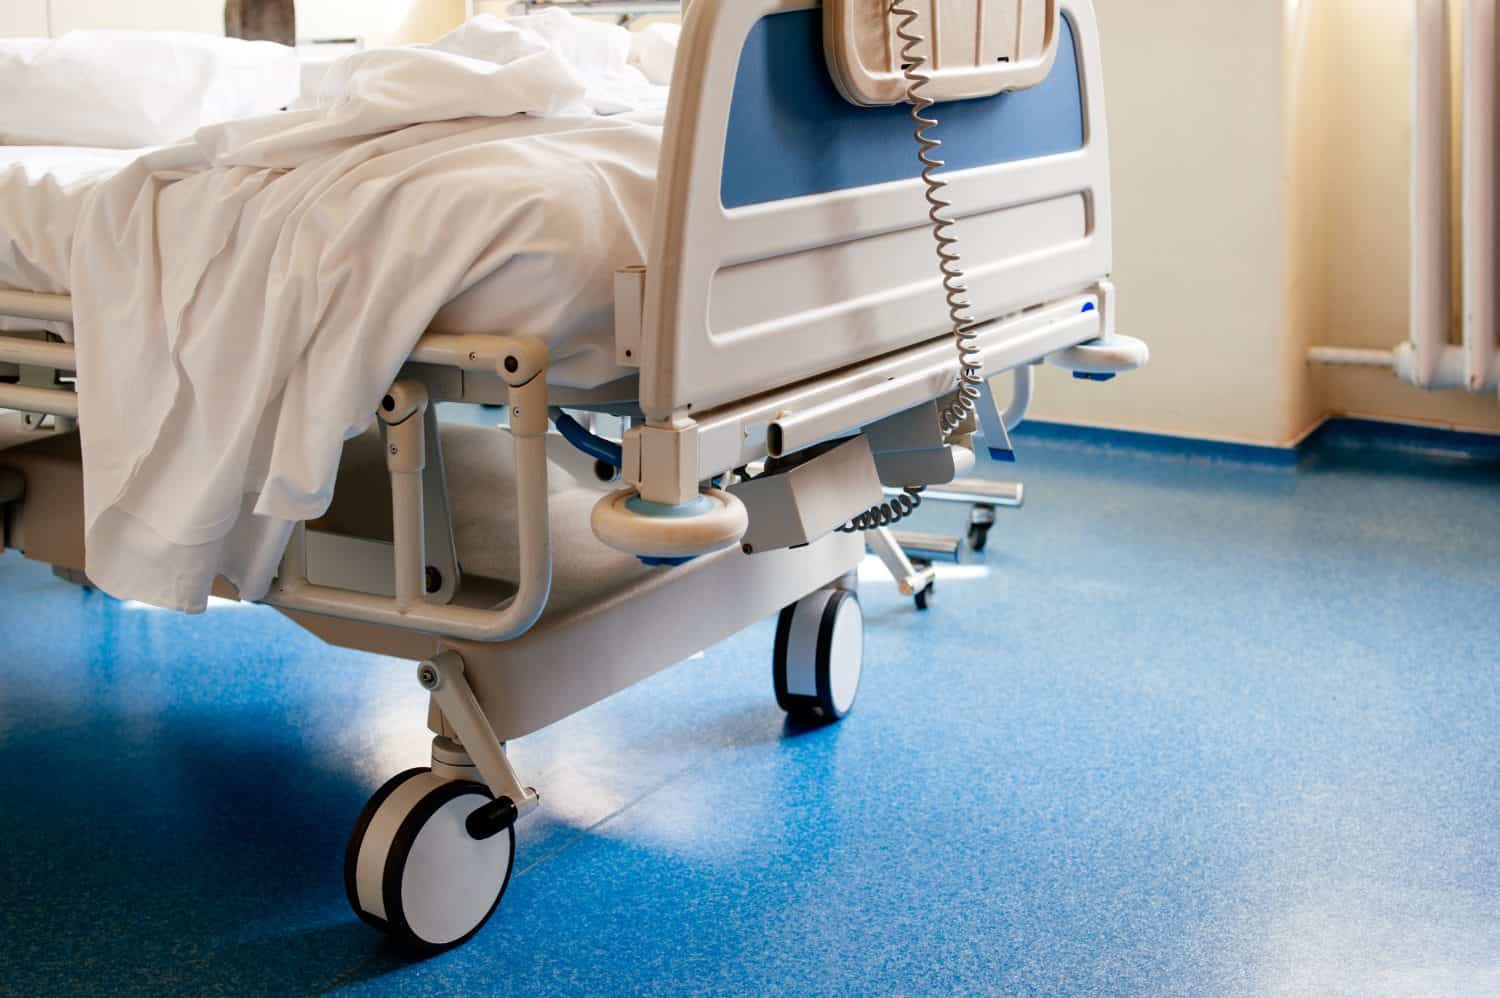 cleaning hospital bed mattress